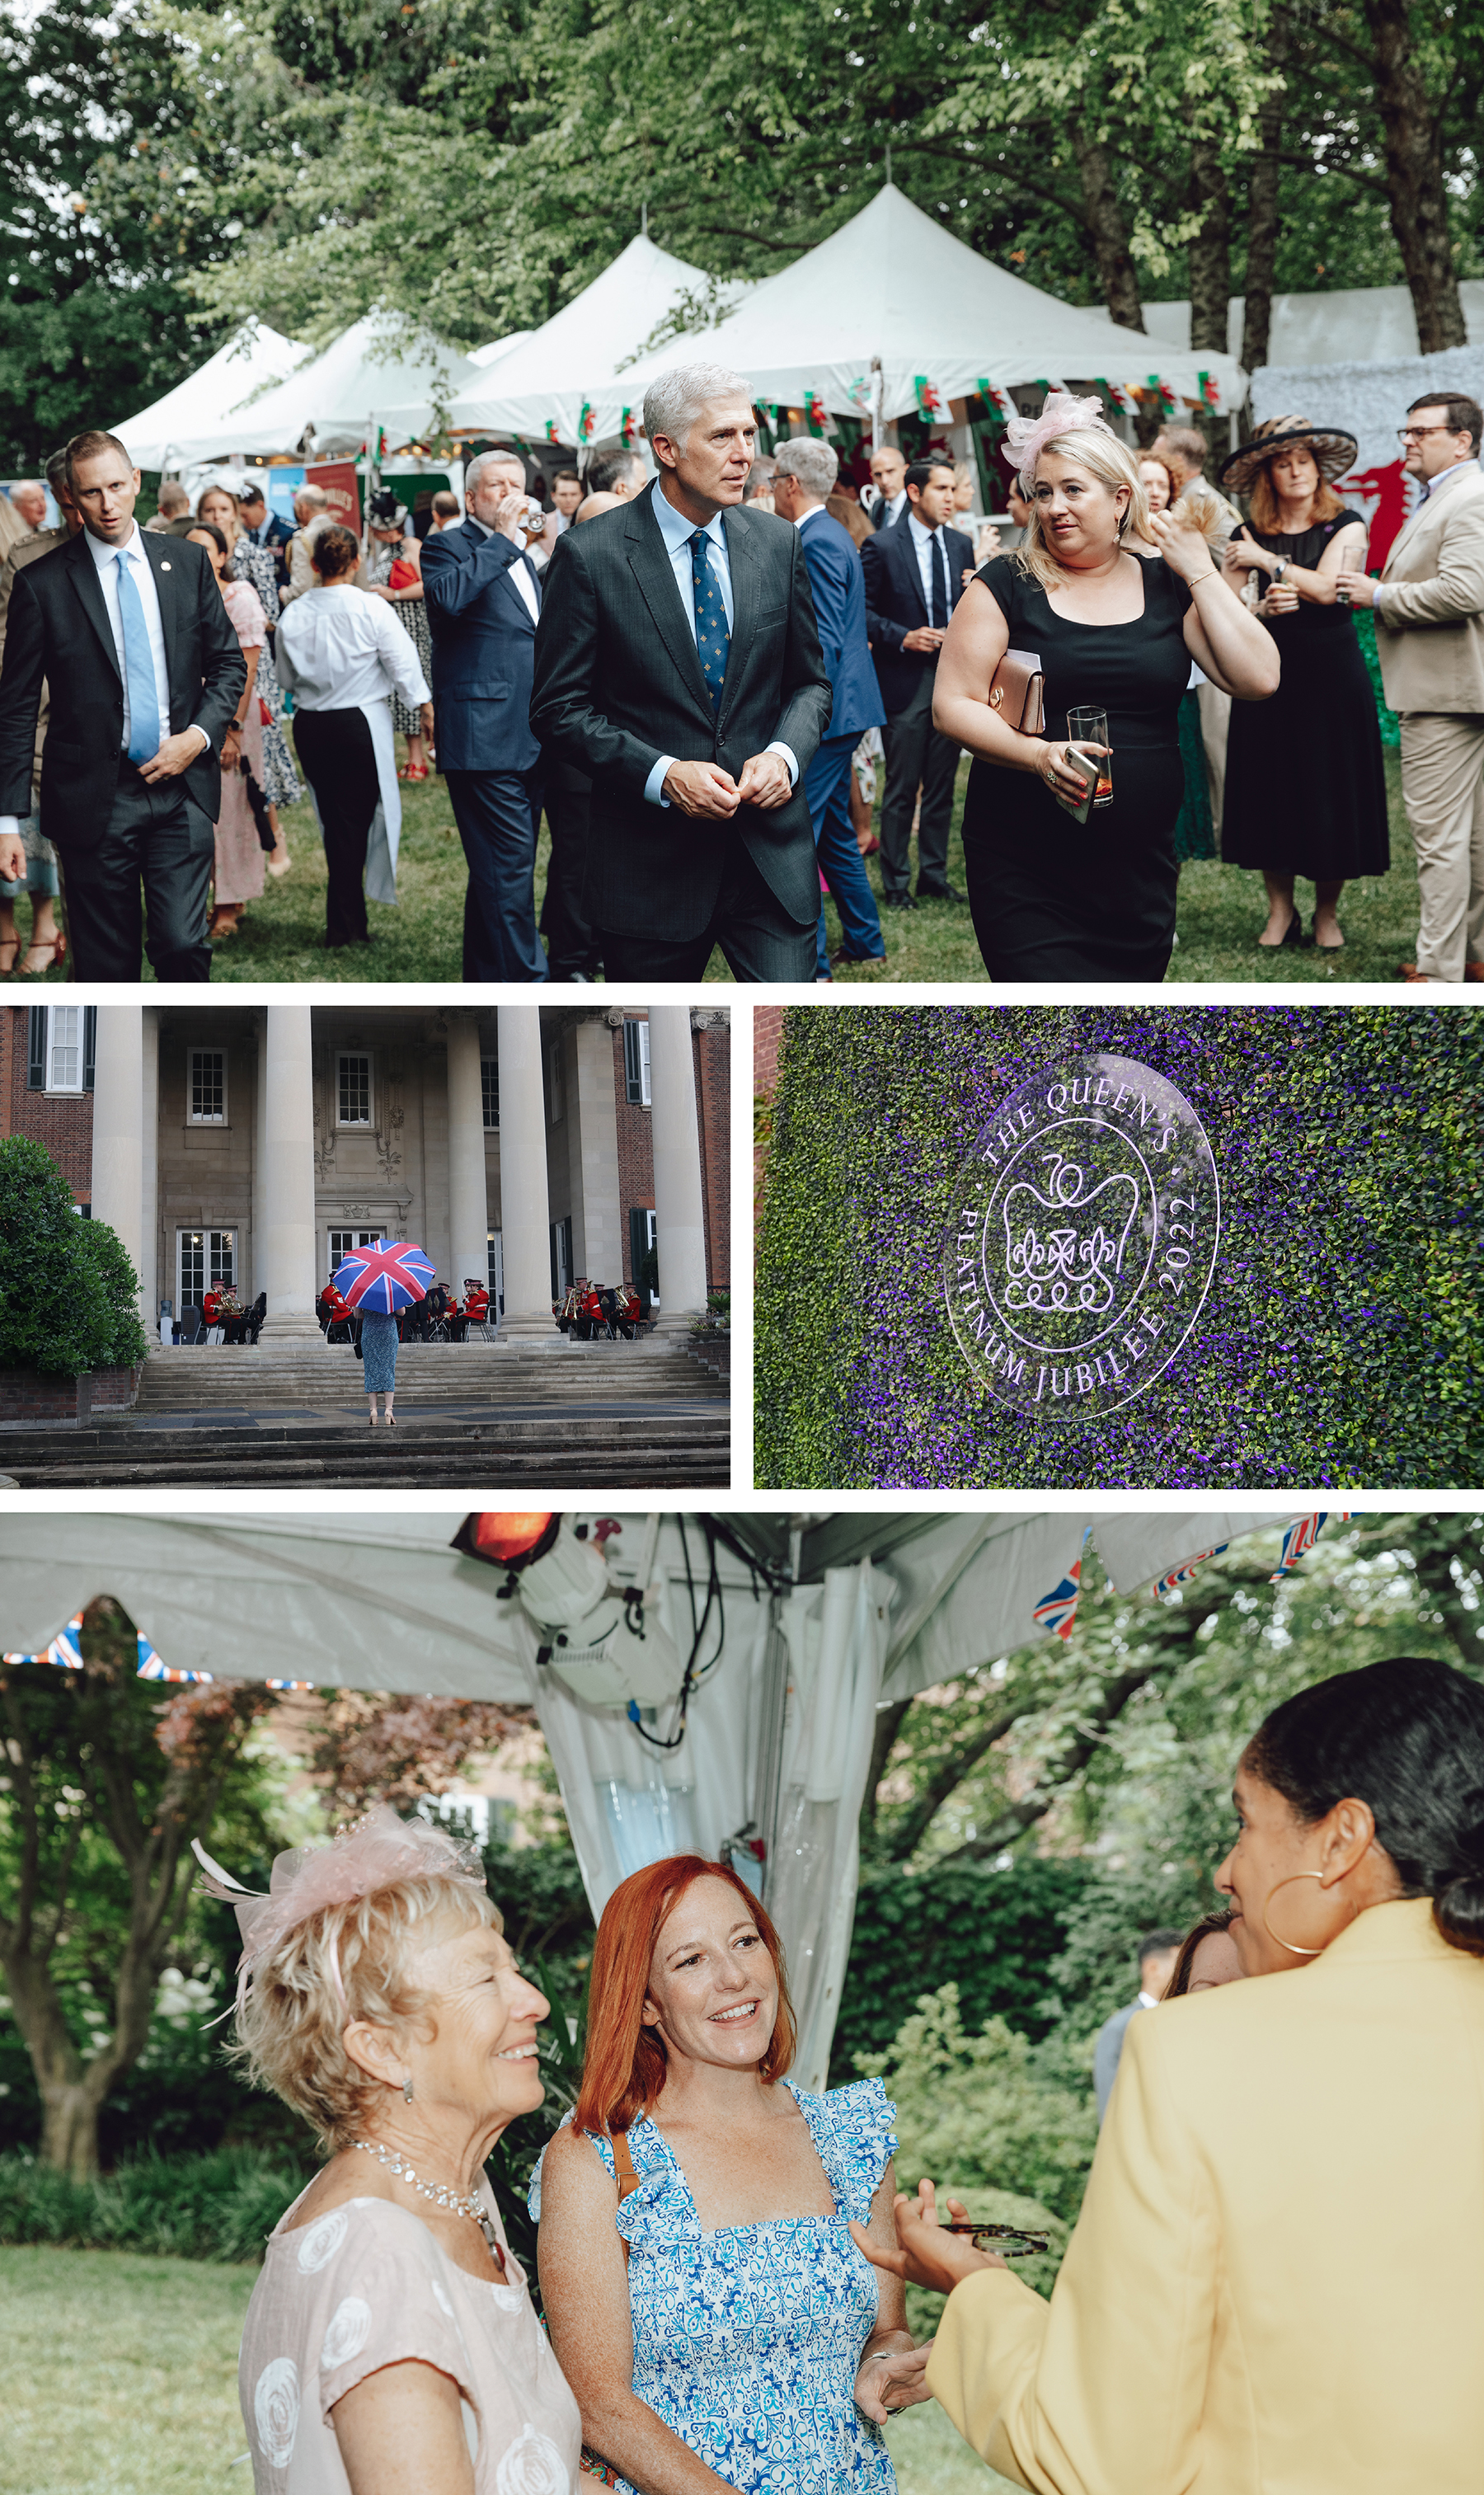 Attendees of the British Embassy's Platinum Jubilee included Supreme Court Justice Neil Gorsuch (top) and former White House press secretary Jen Psaki (bottom center).